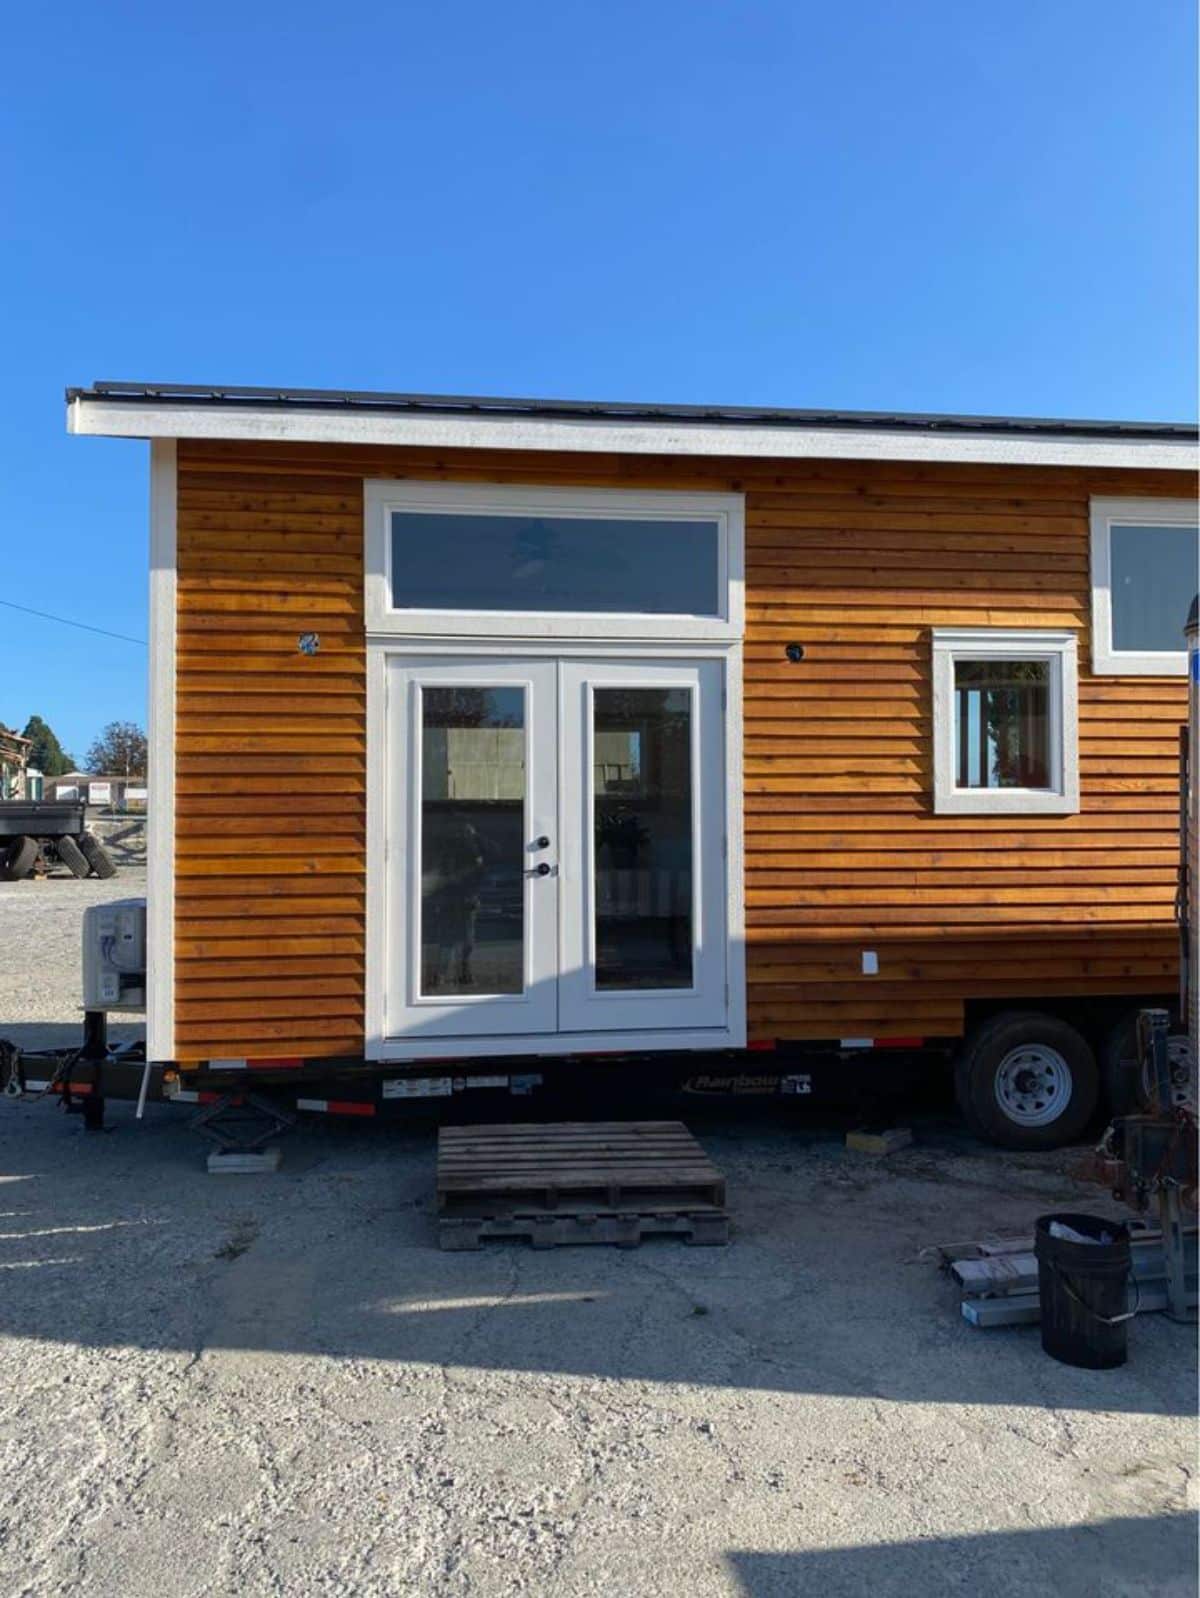 main entrance view of chic tiny home